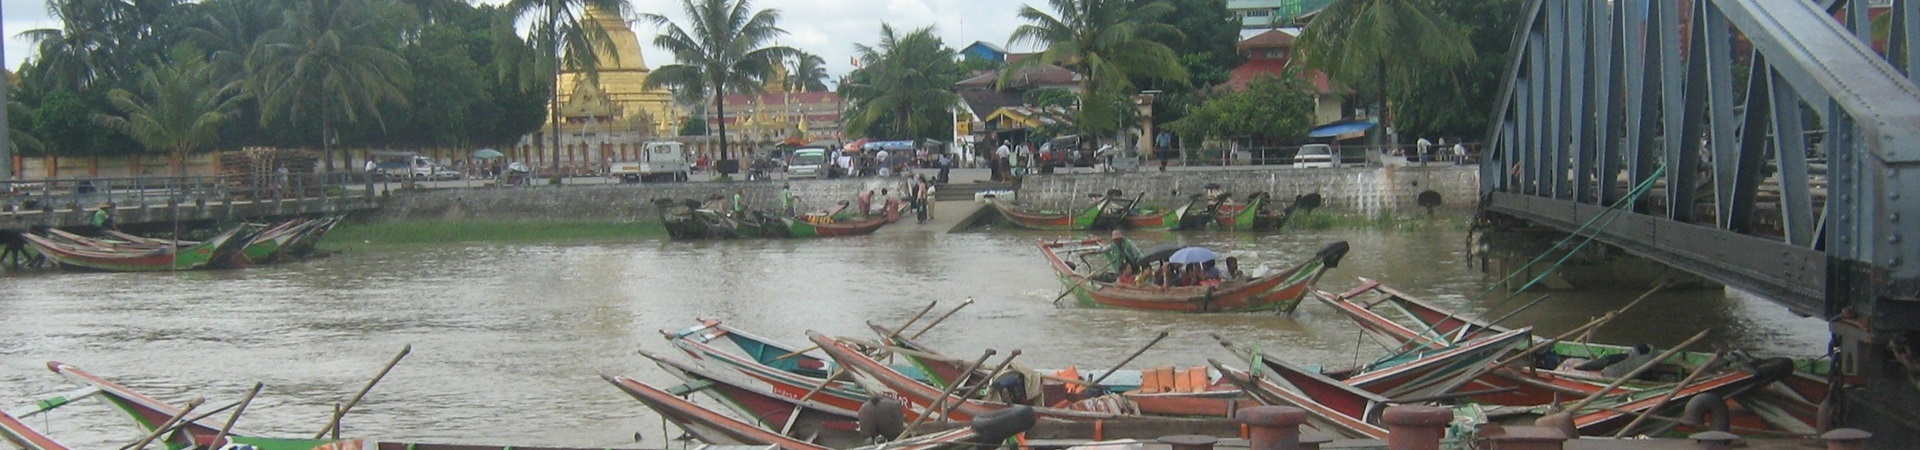 Image of Twante Tour by Boat